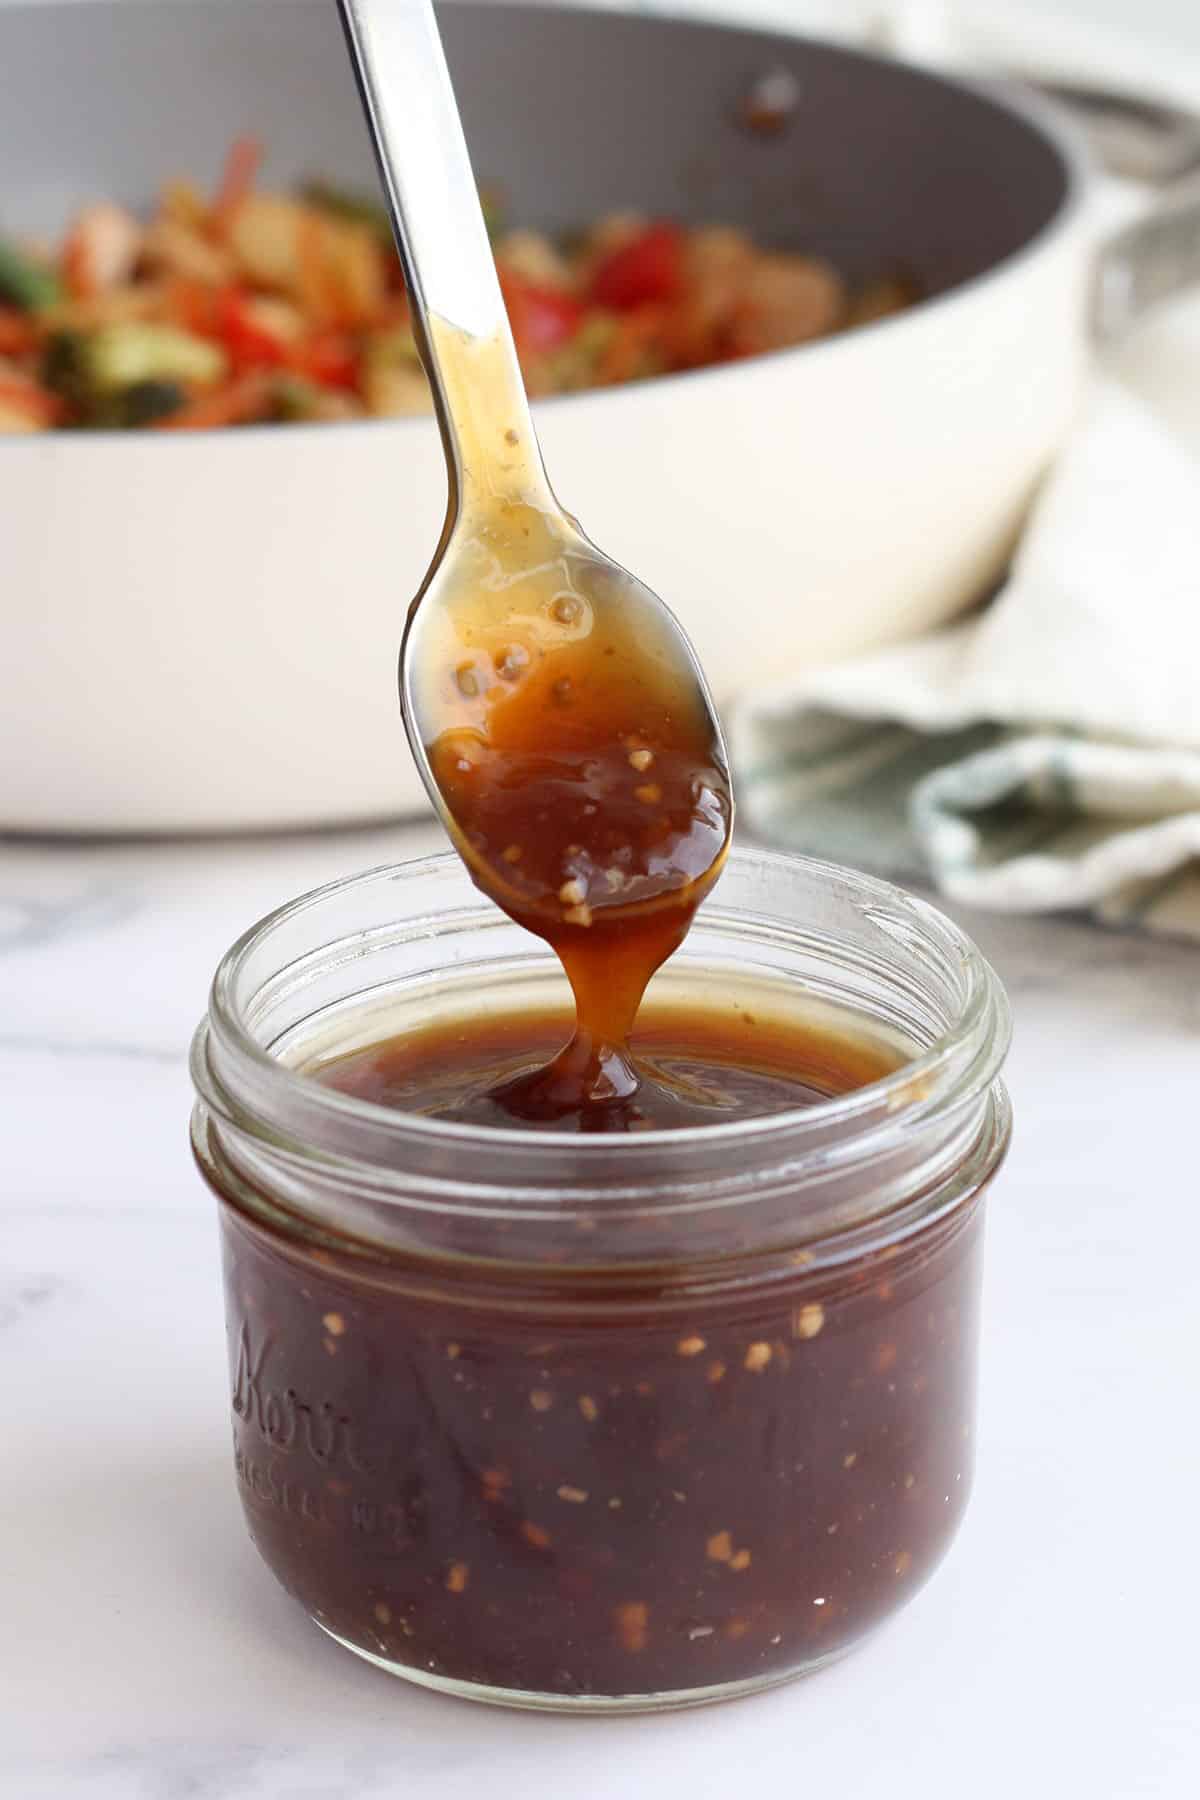 Homemade stir-fry sauce in a glass jar with a spoon